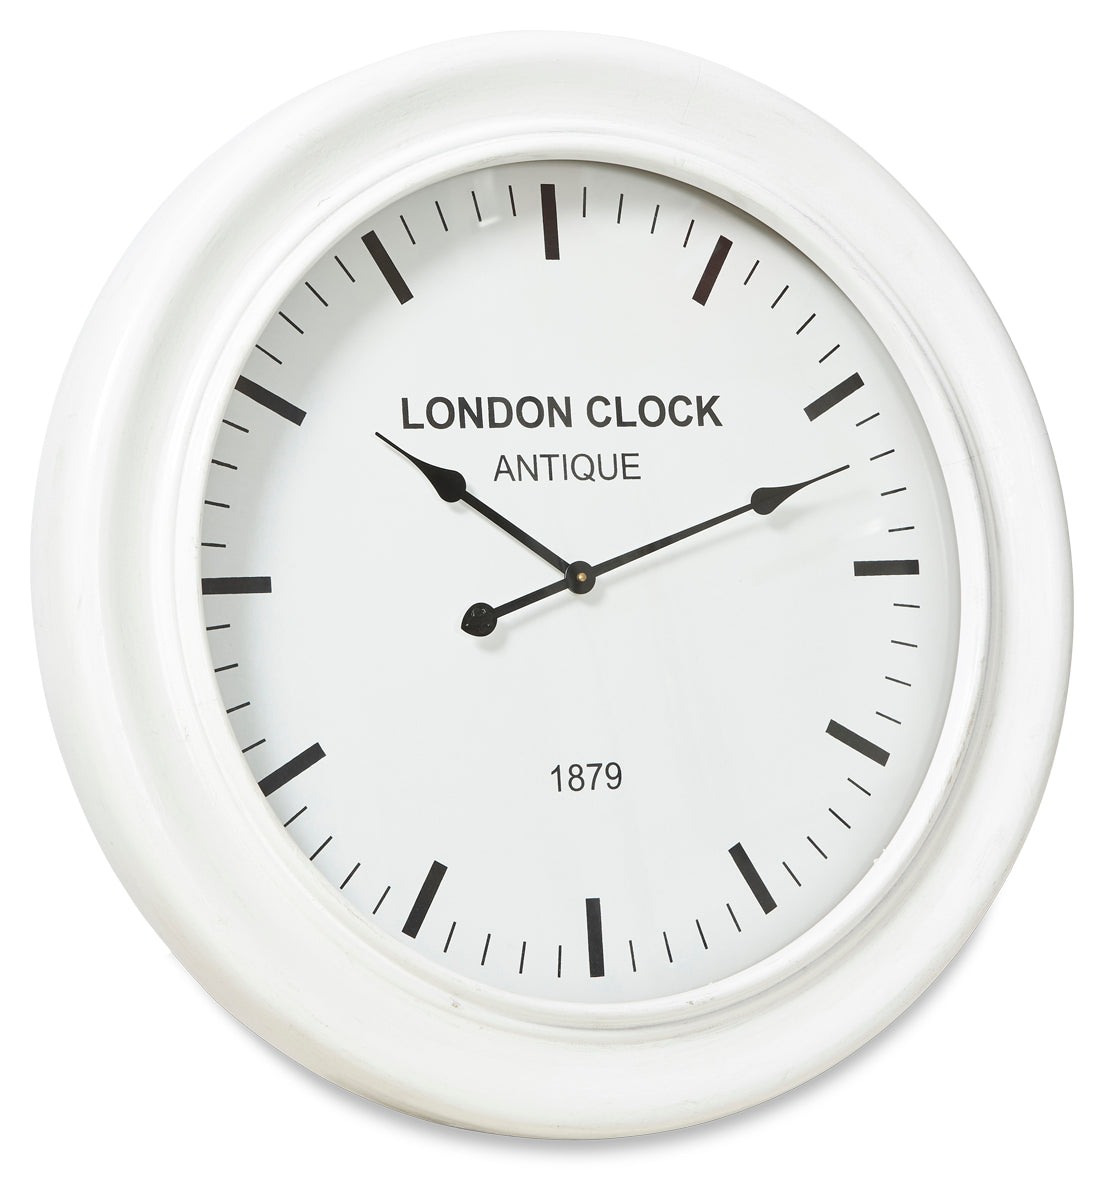 London Classic Wooden Wall Clock - White